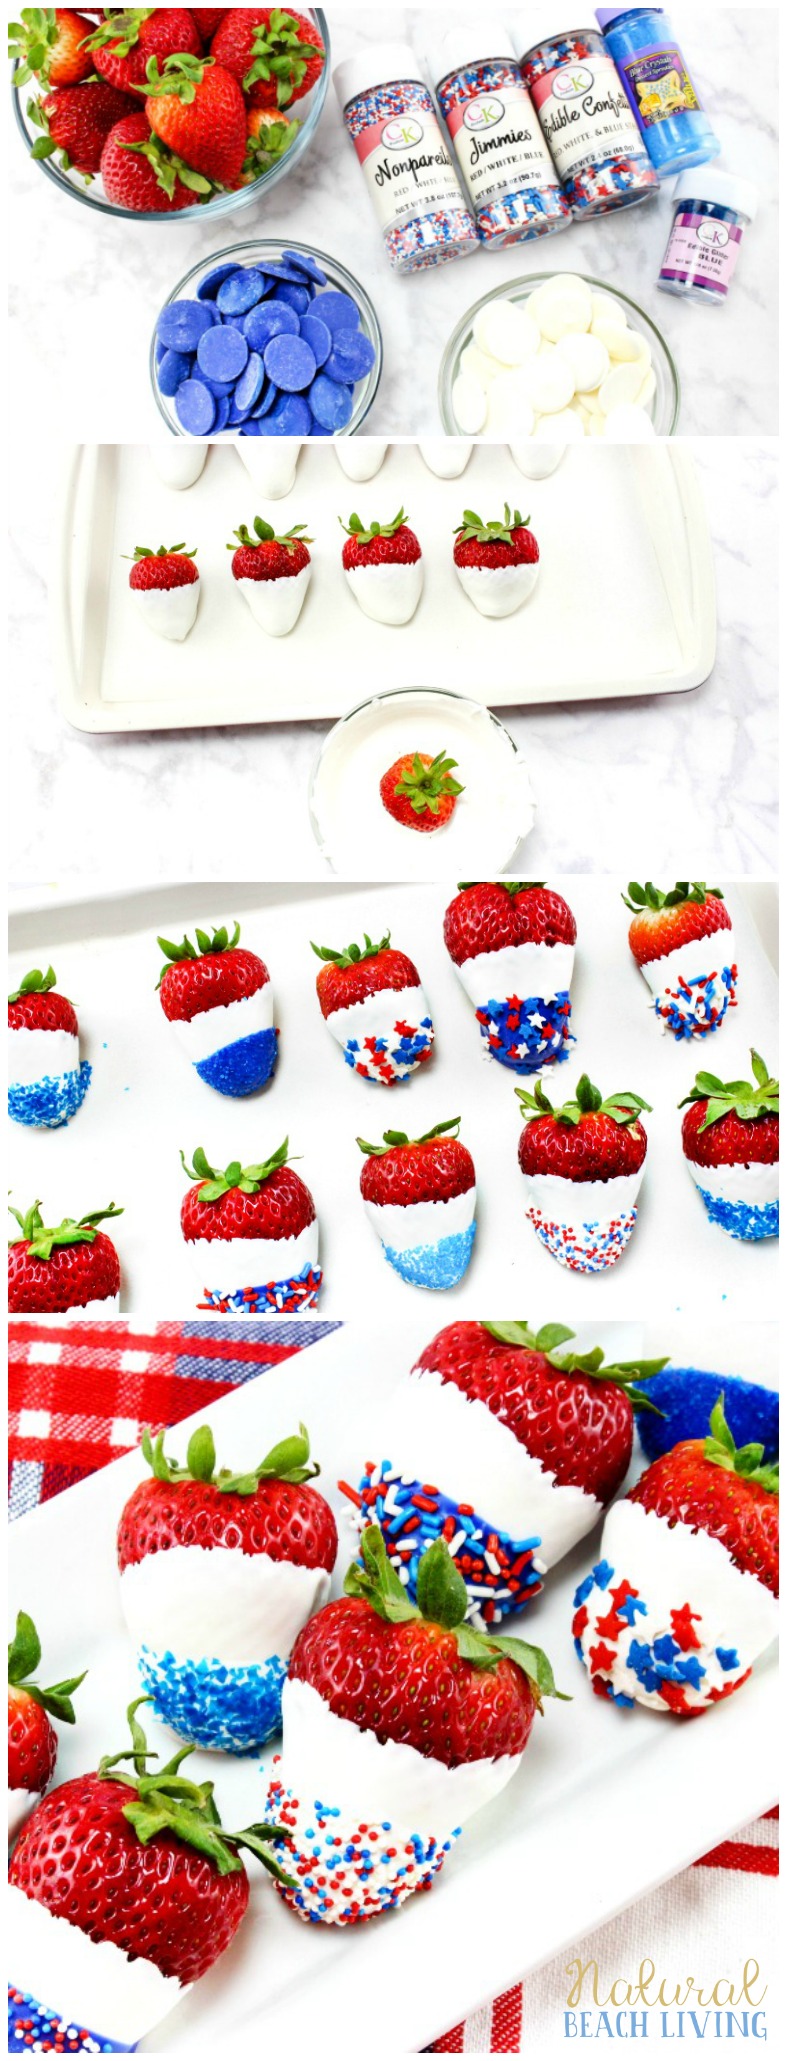 How to Make The Best Chocolate Covered Strawberries Recipe, Perfect 4th of July & Memorial Day Food, Patriotic Chocolate Covered Strawberries are Yum!